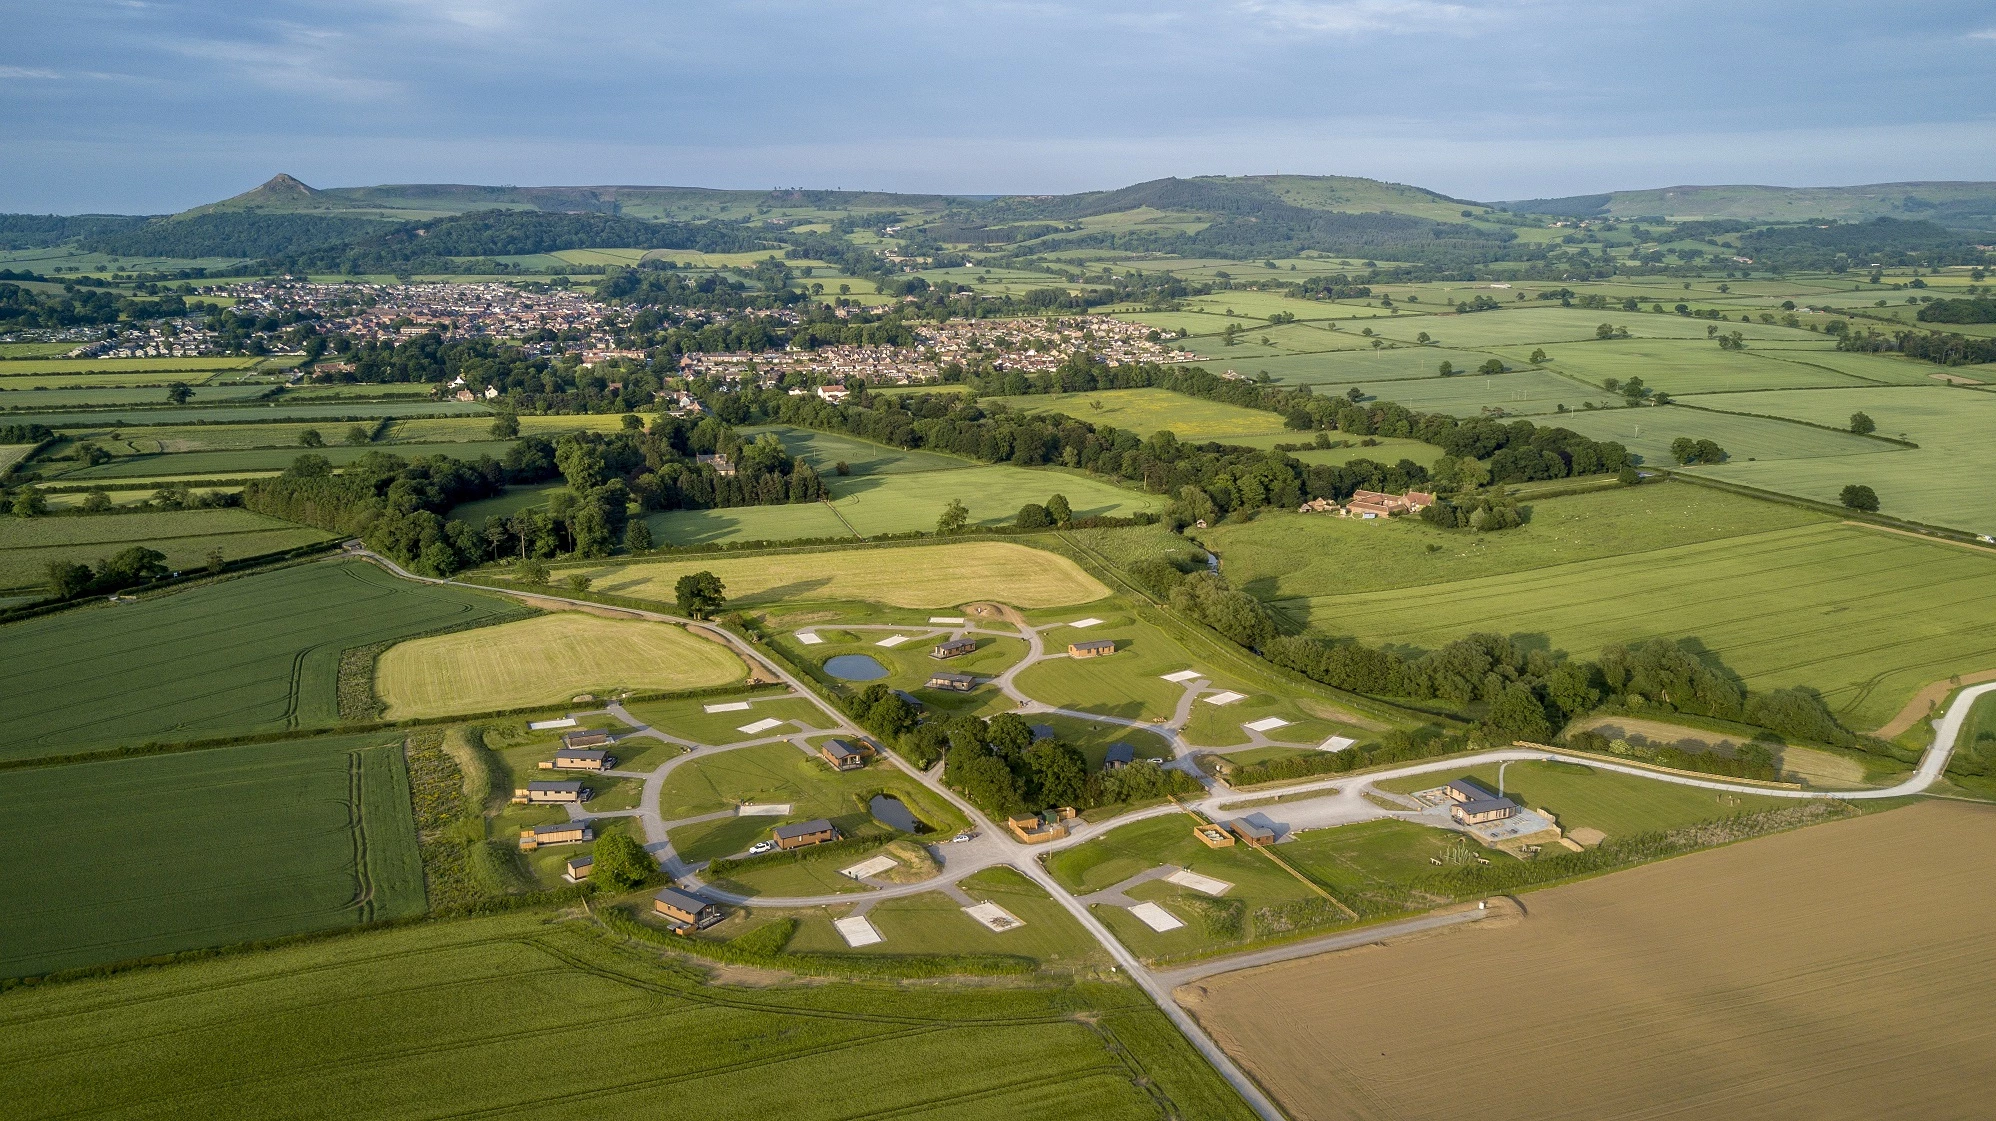 An aerial view of Angrove Country Park